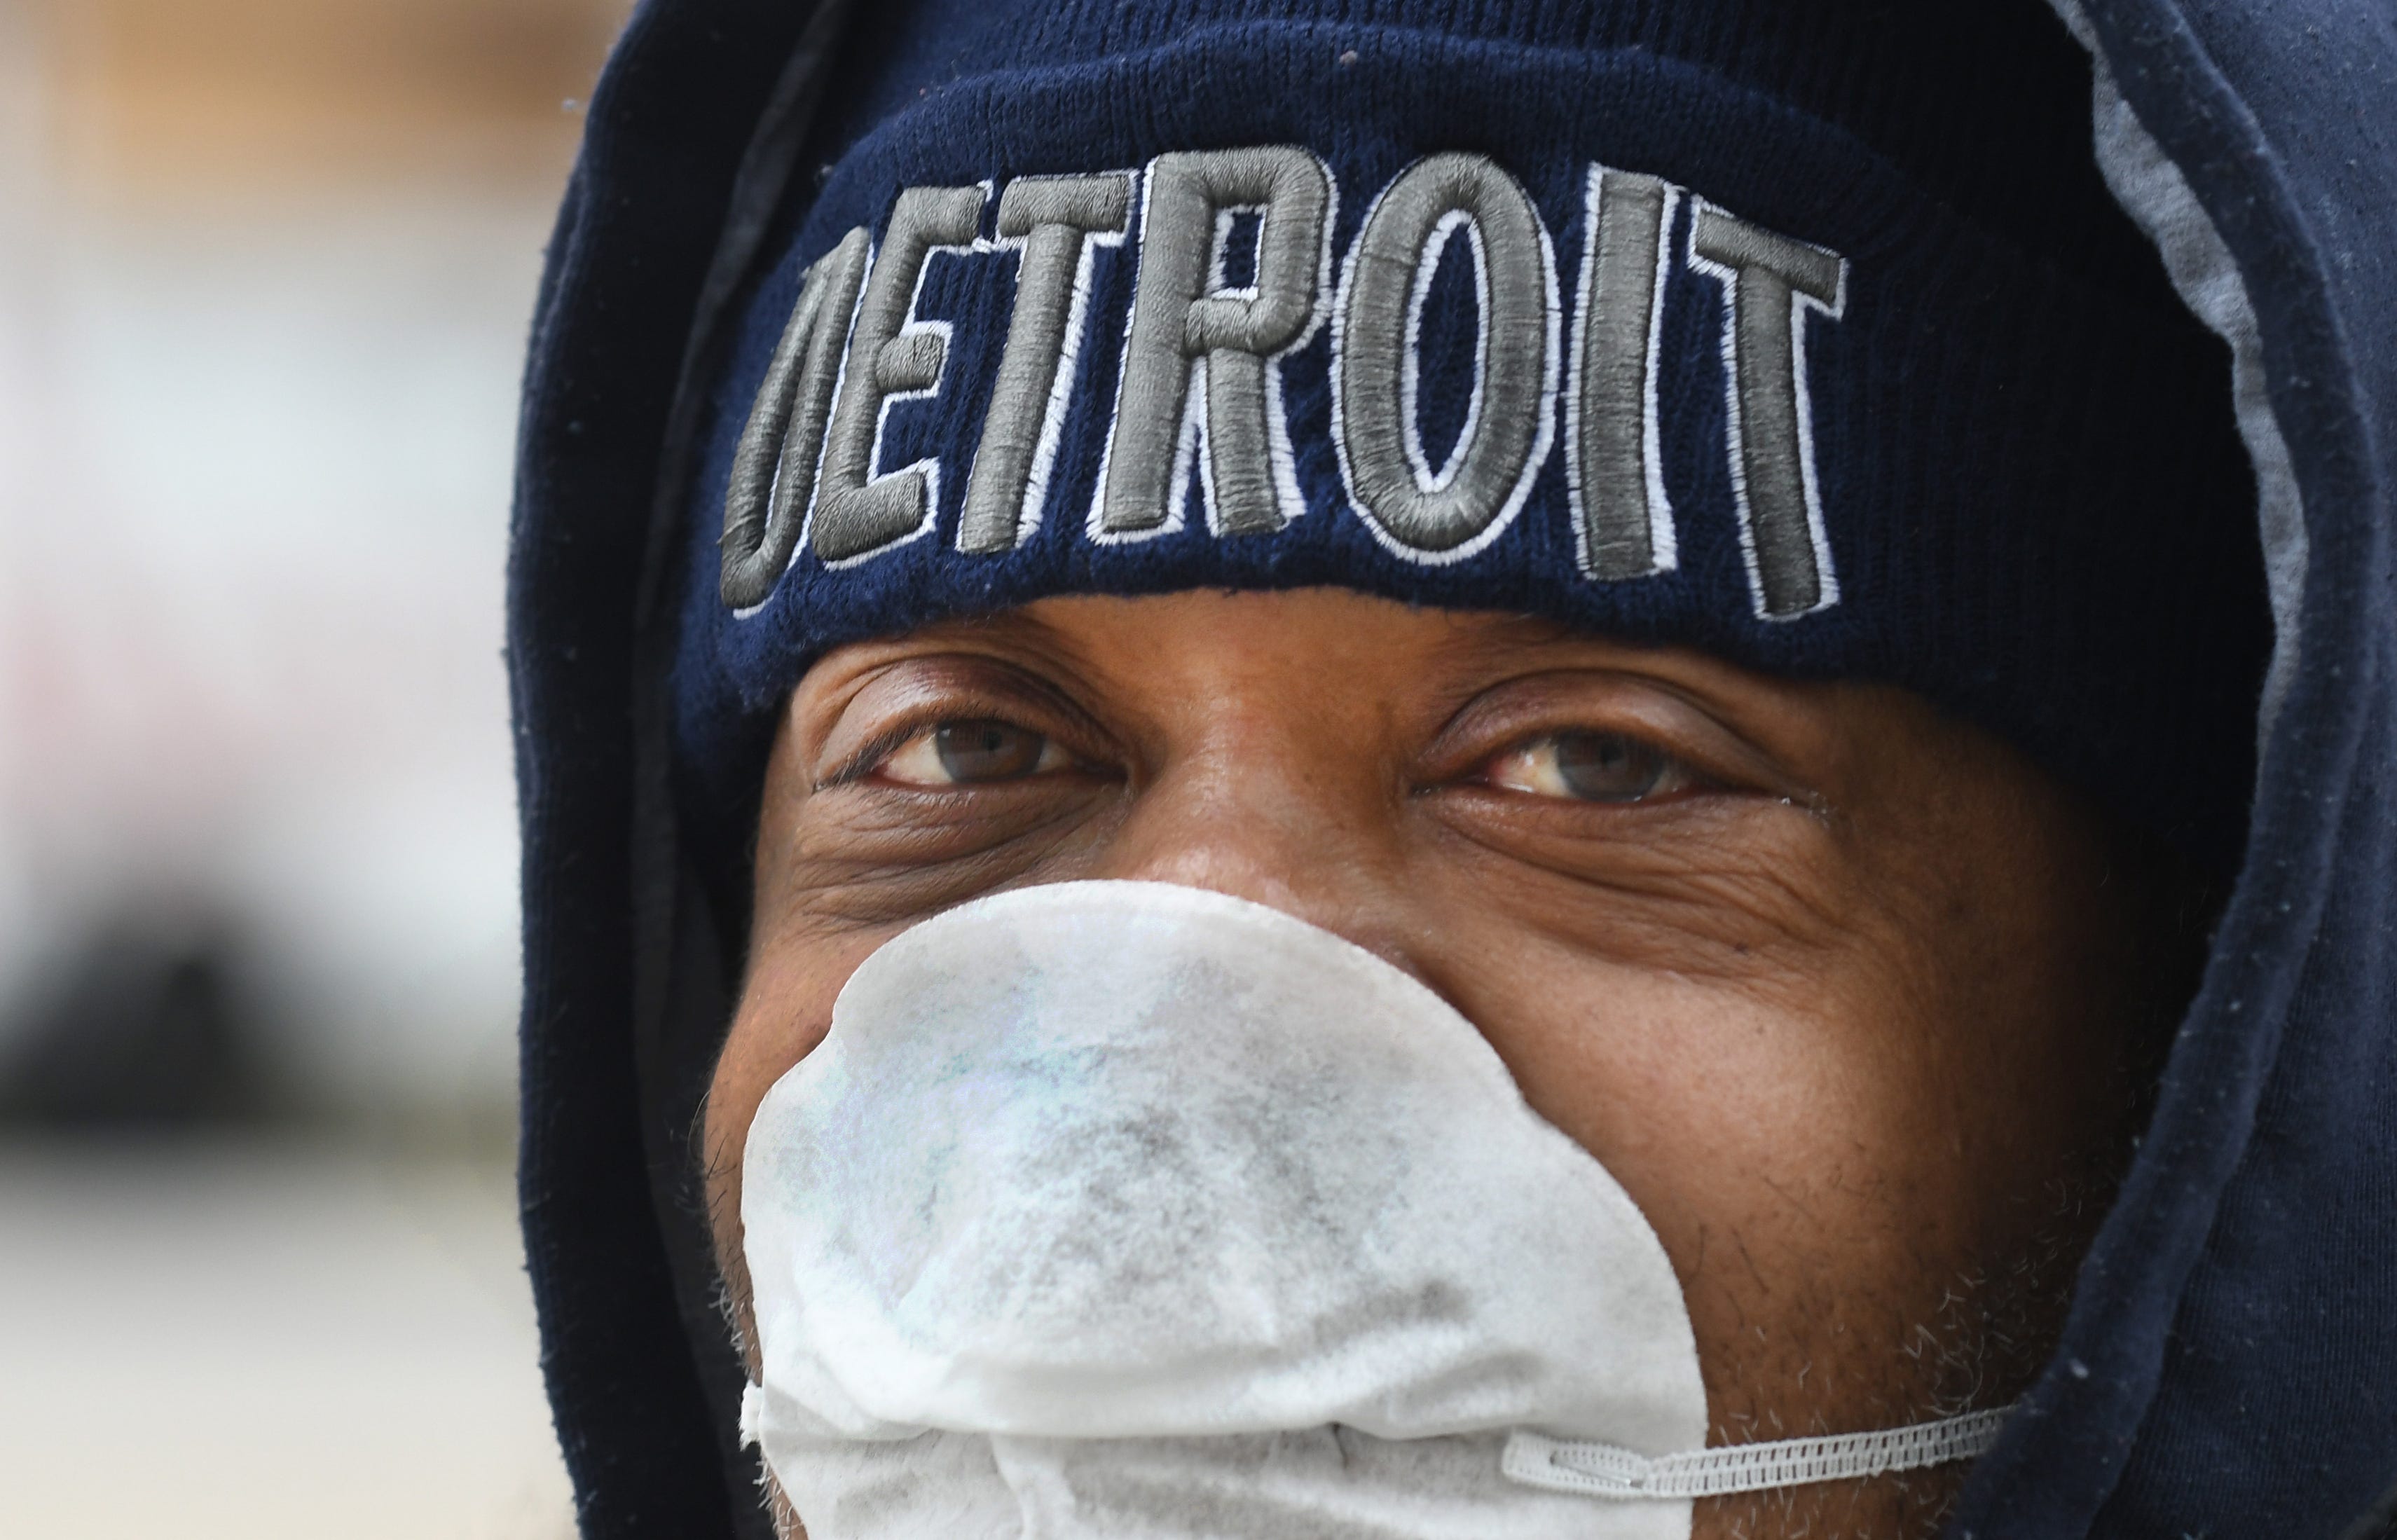 Luther Parks of Detroit waits for the bus March 30 in downtown Detroit, "Haven't been out in a couple days, it's quiet especially for a Monday." As for how he is doing, "They say I have to be smarter and I have to endure."